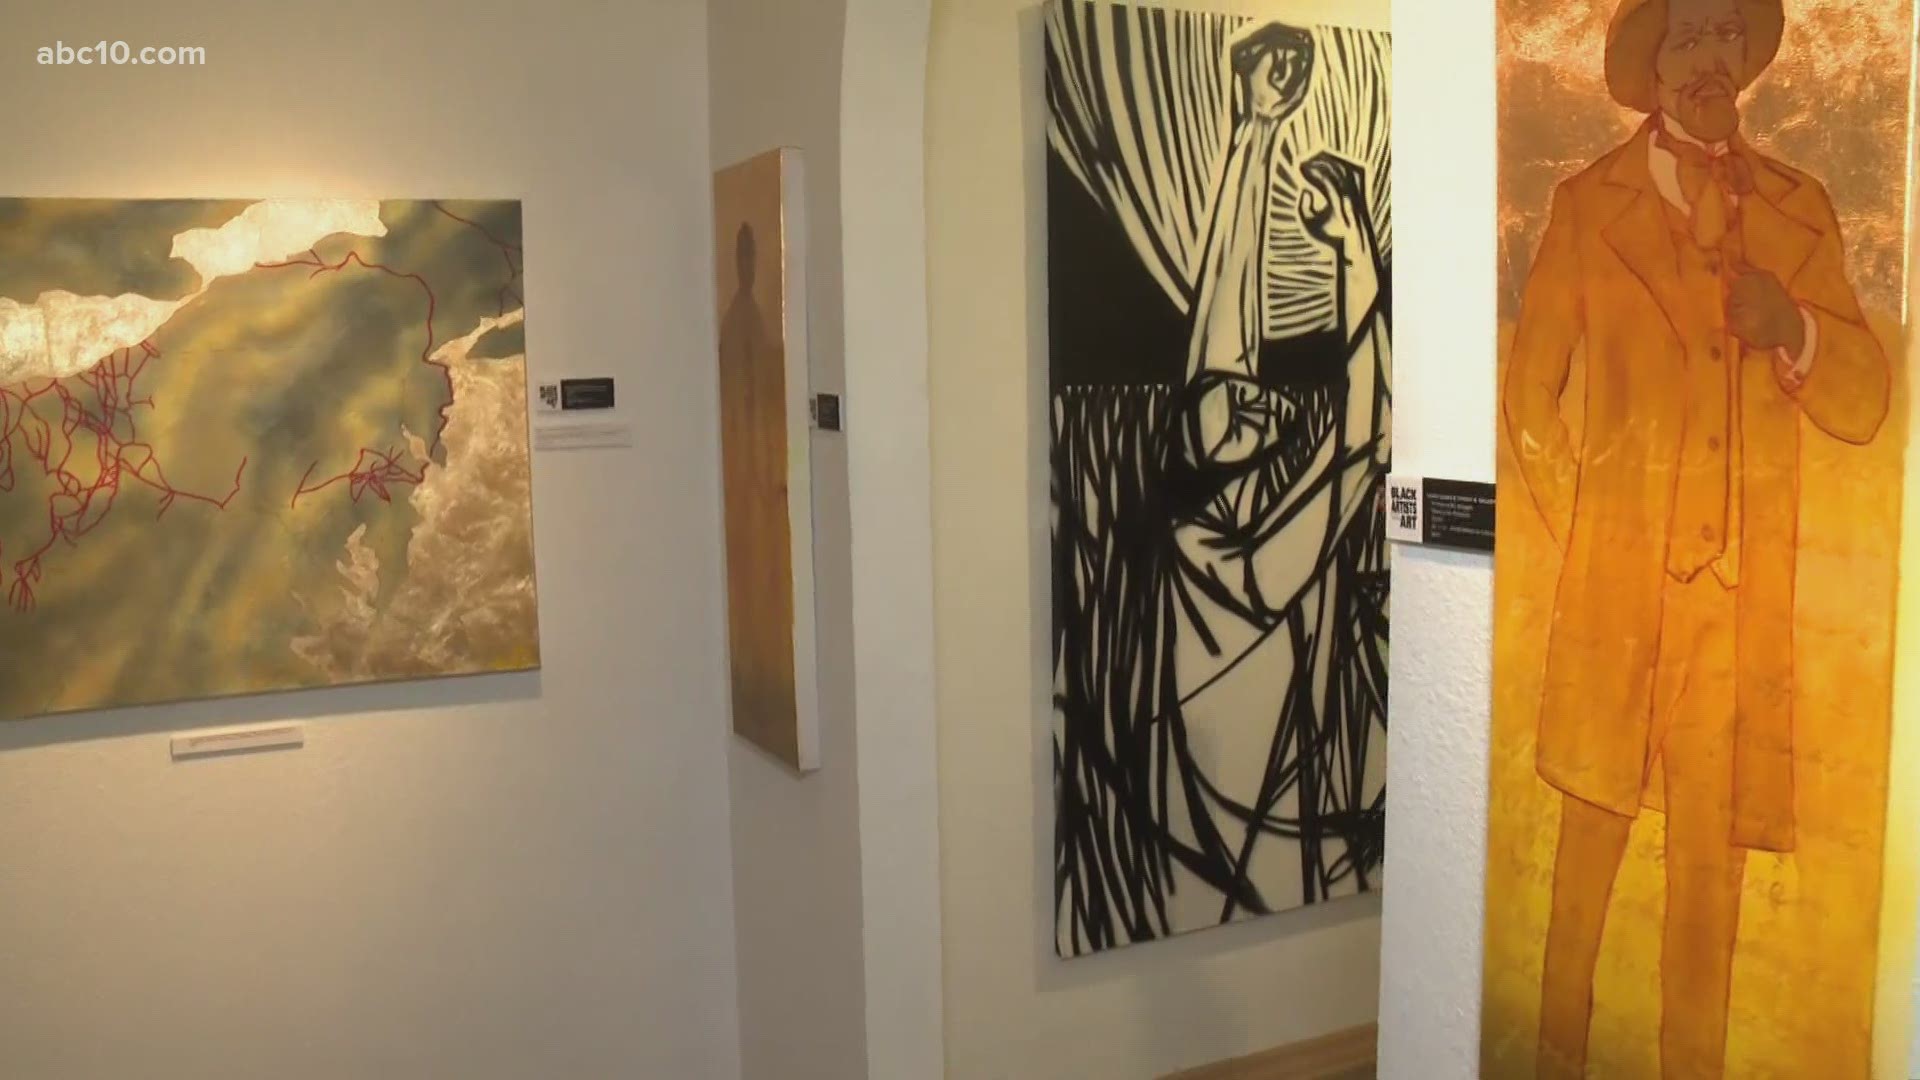 For 2021 Juneteenth, check out the amazing art collection at this Sacramento gallery.